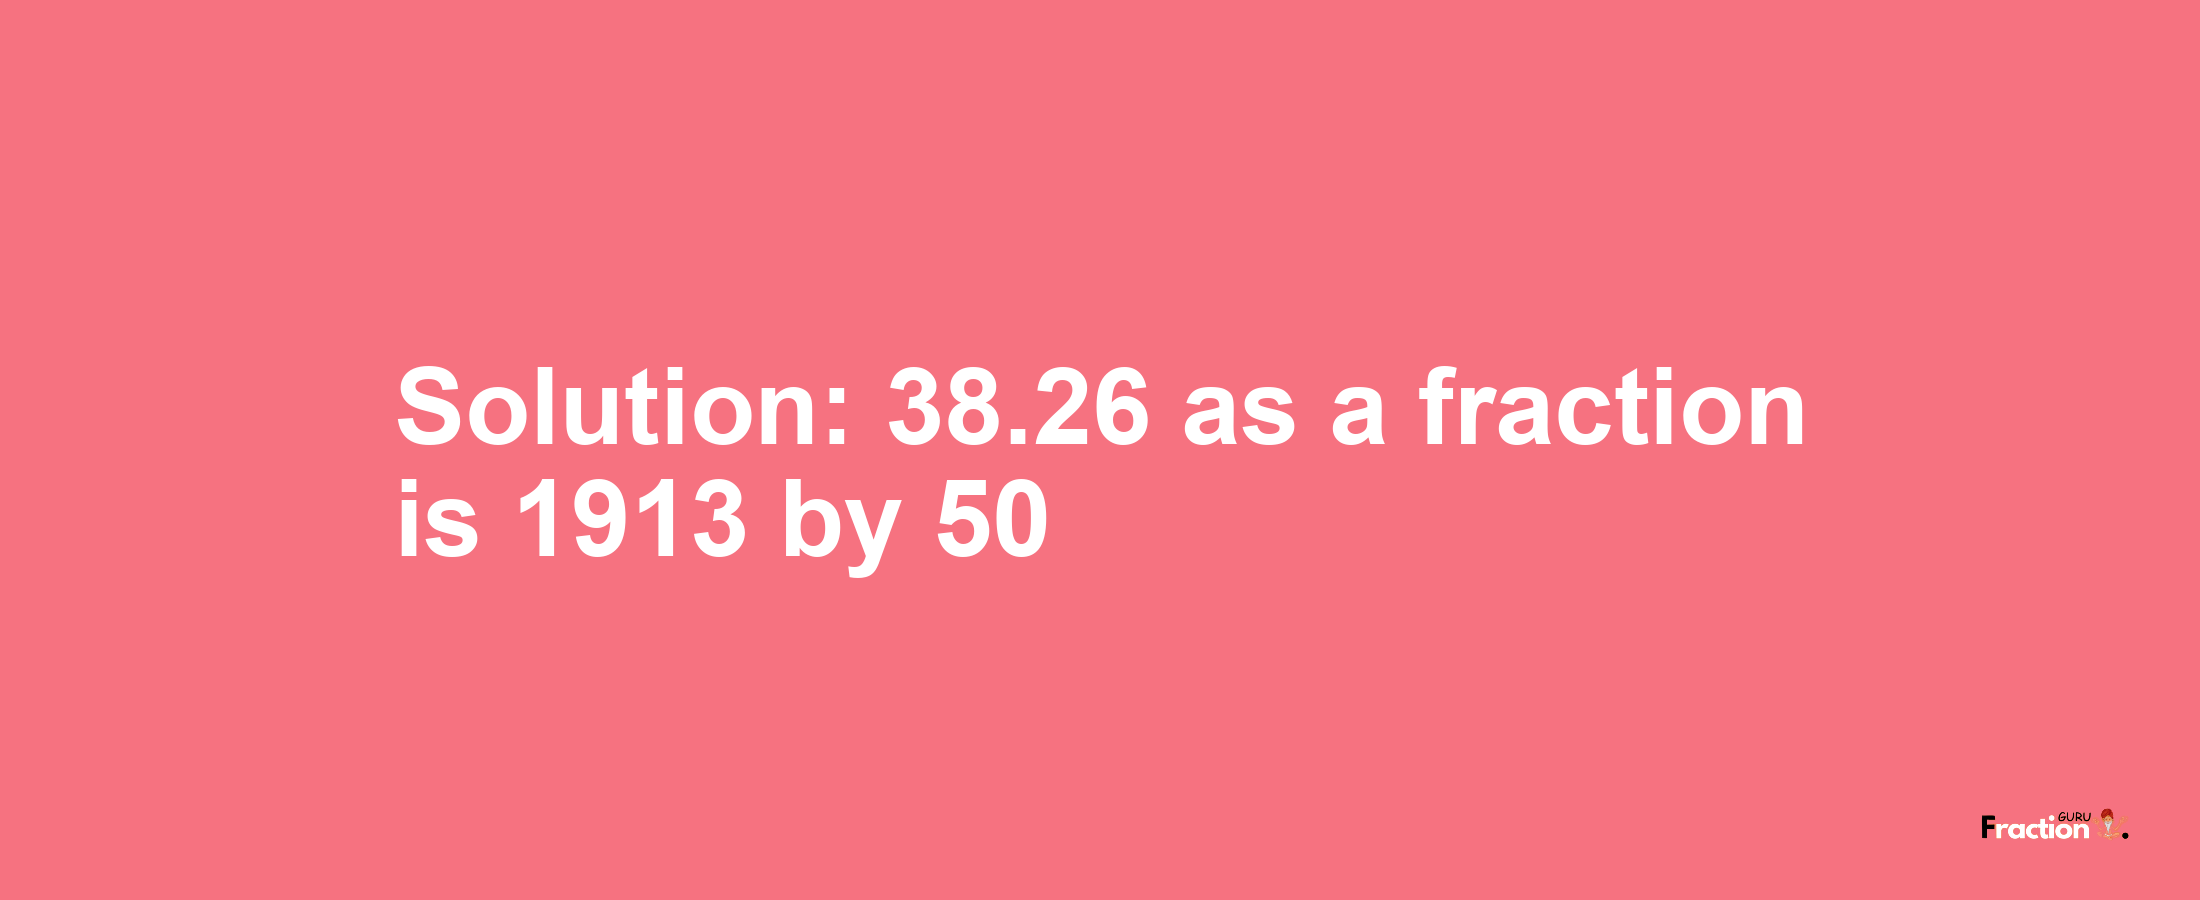 Solution:38.26 as a fraction is 1913/50